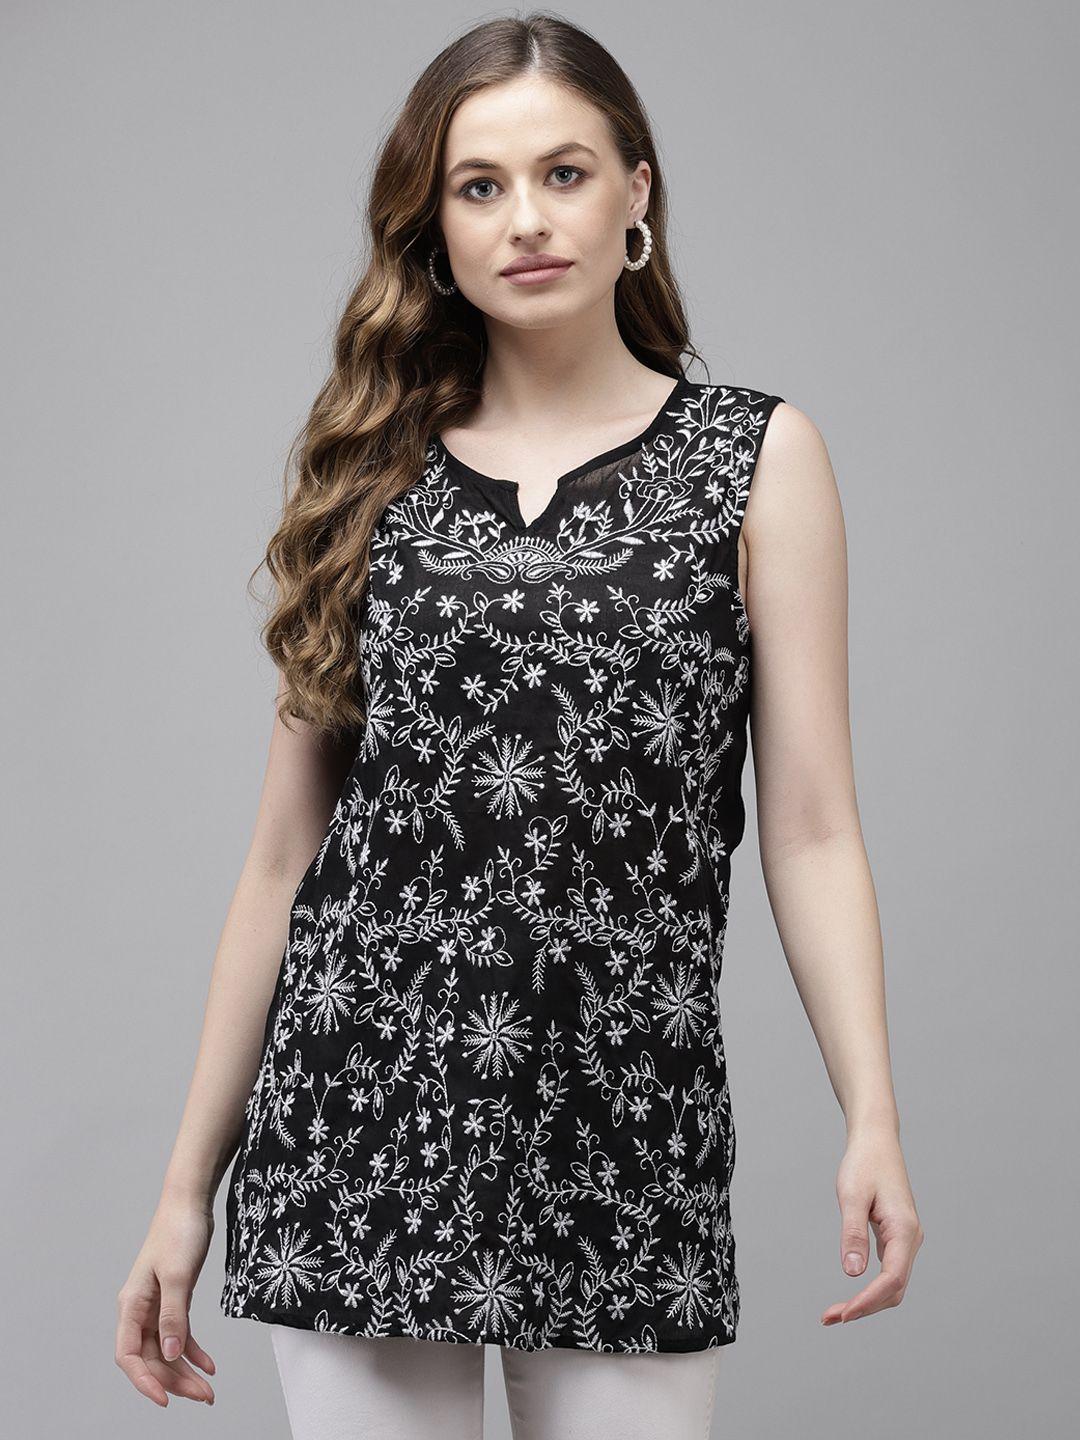 ishin-black-&-white-floral-embroidered-sweetheart-neck-tank-top